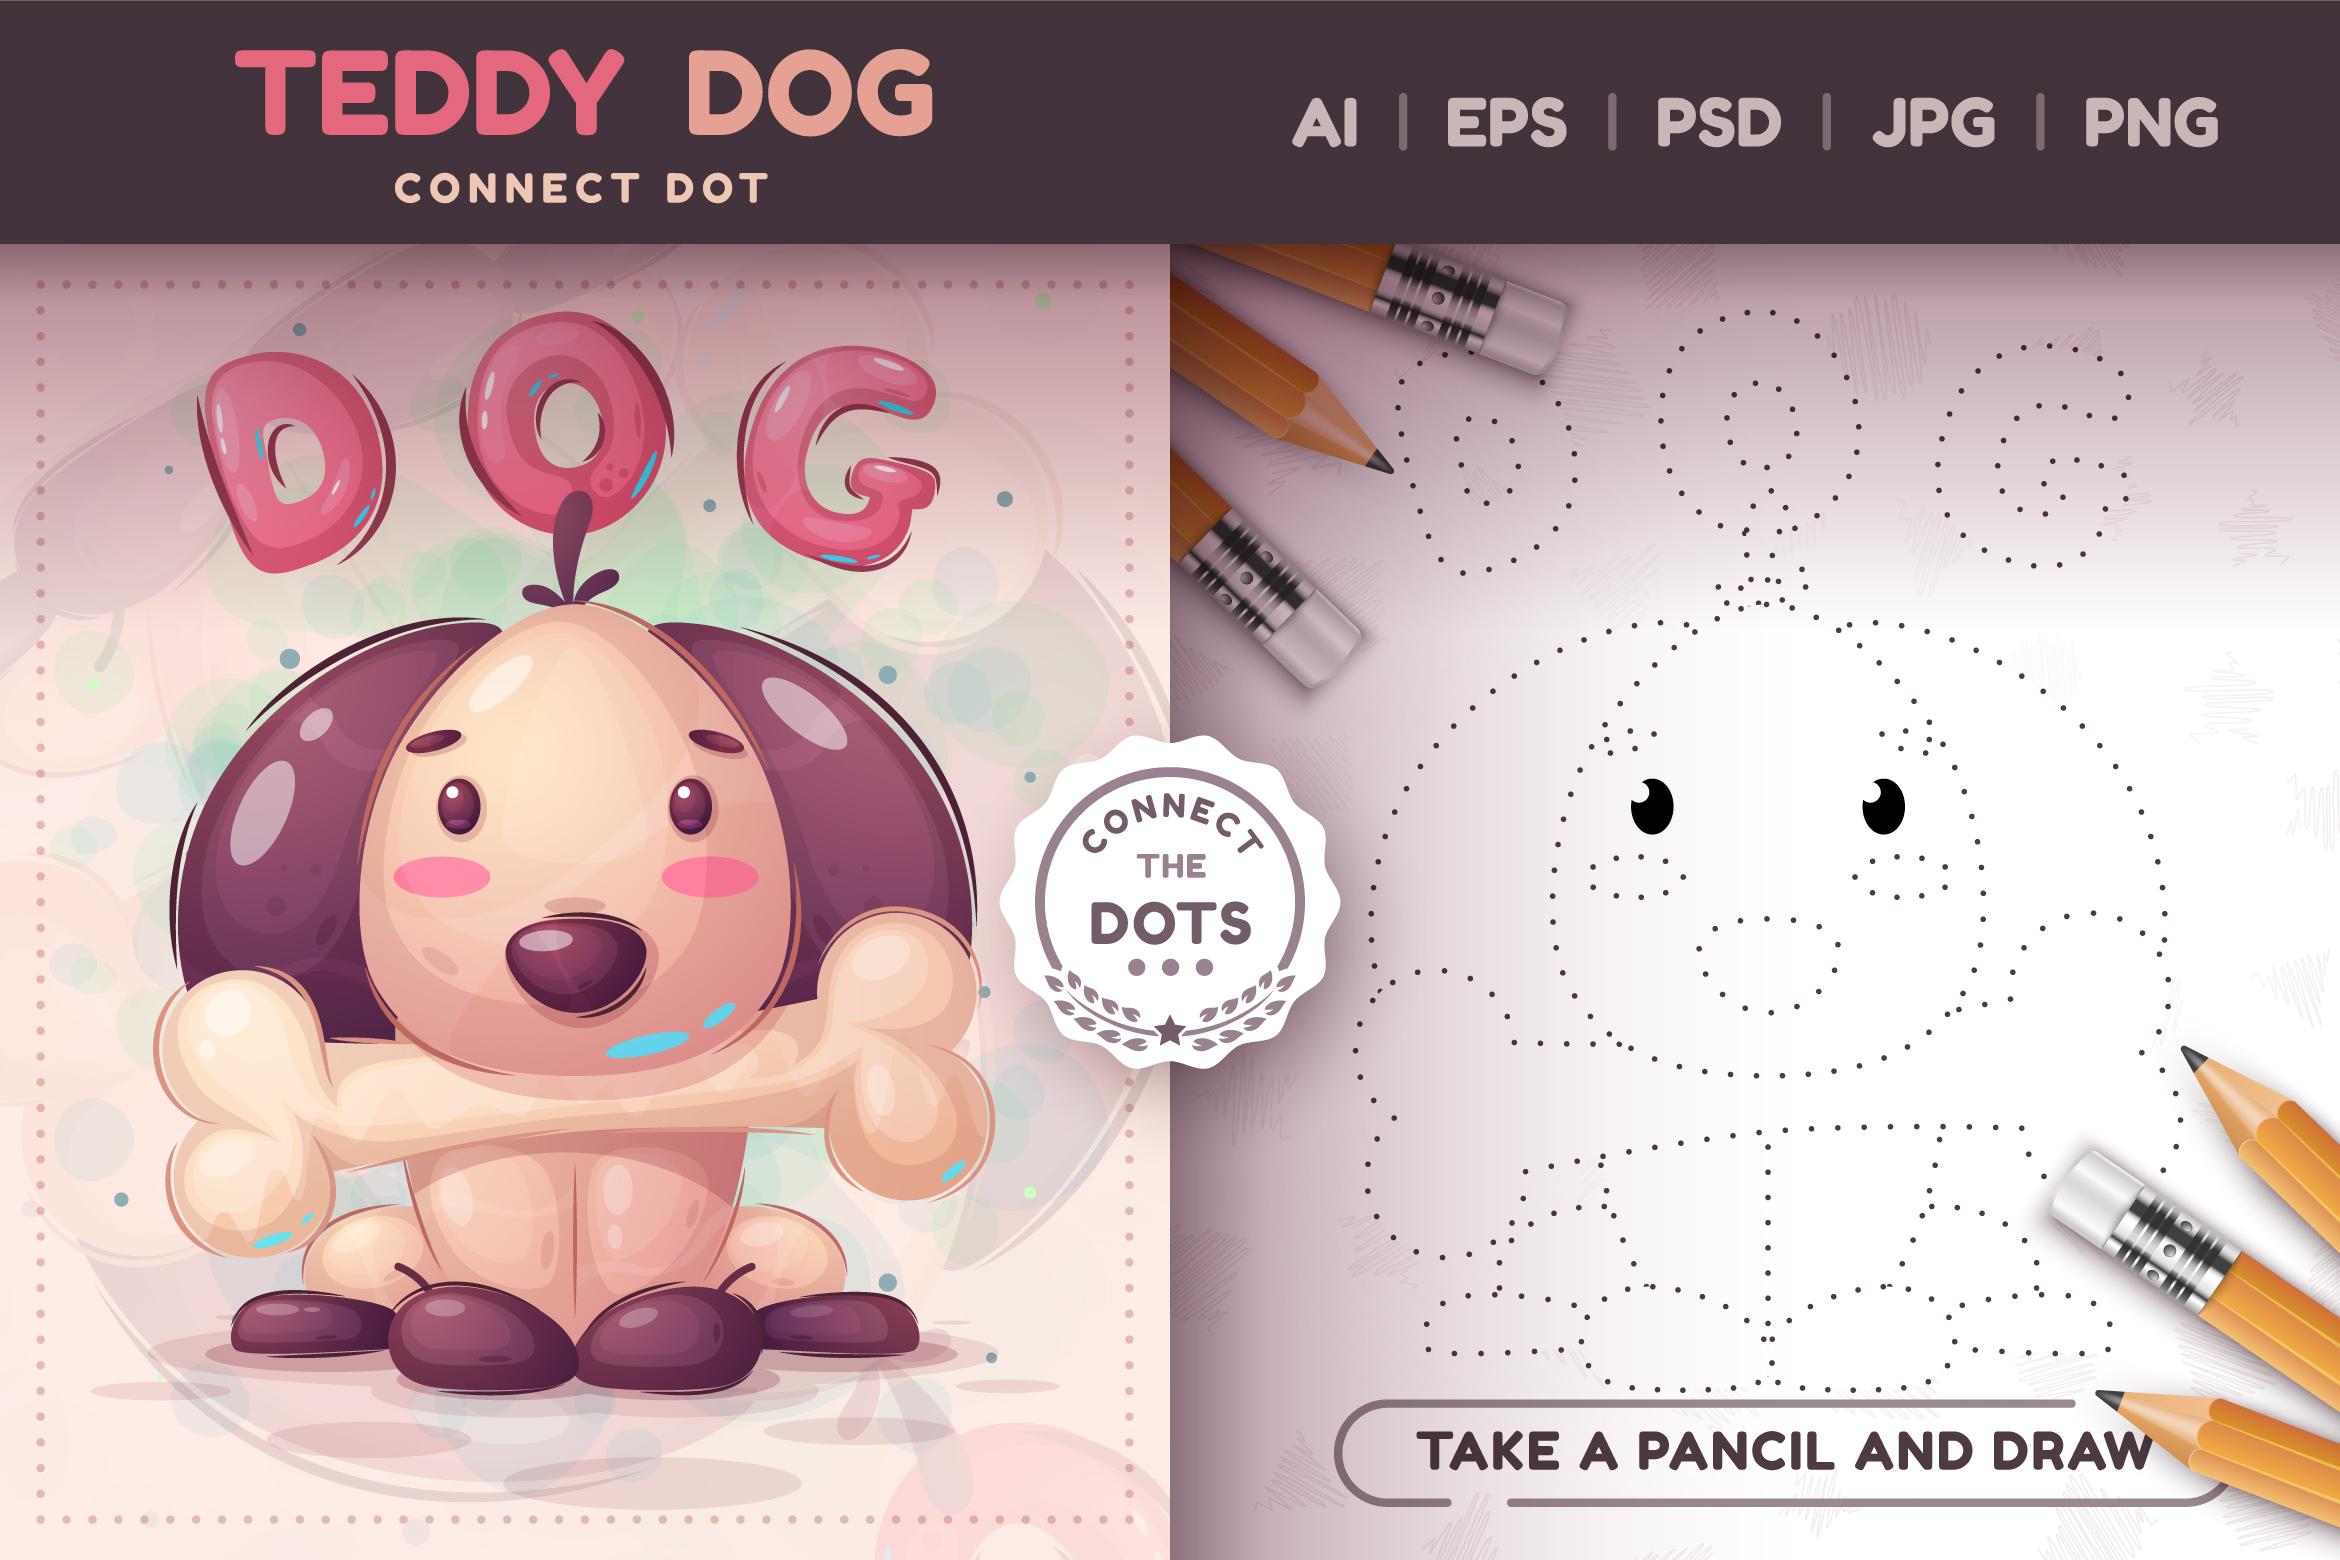 Teddy Dog - Game for Kids, Connect Dot